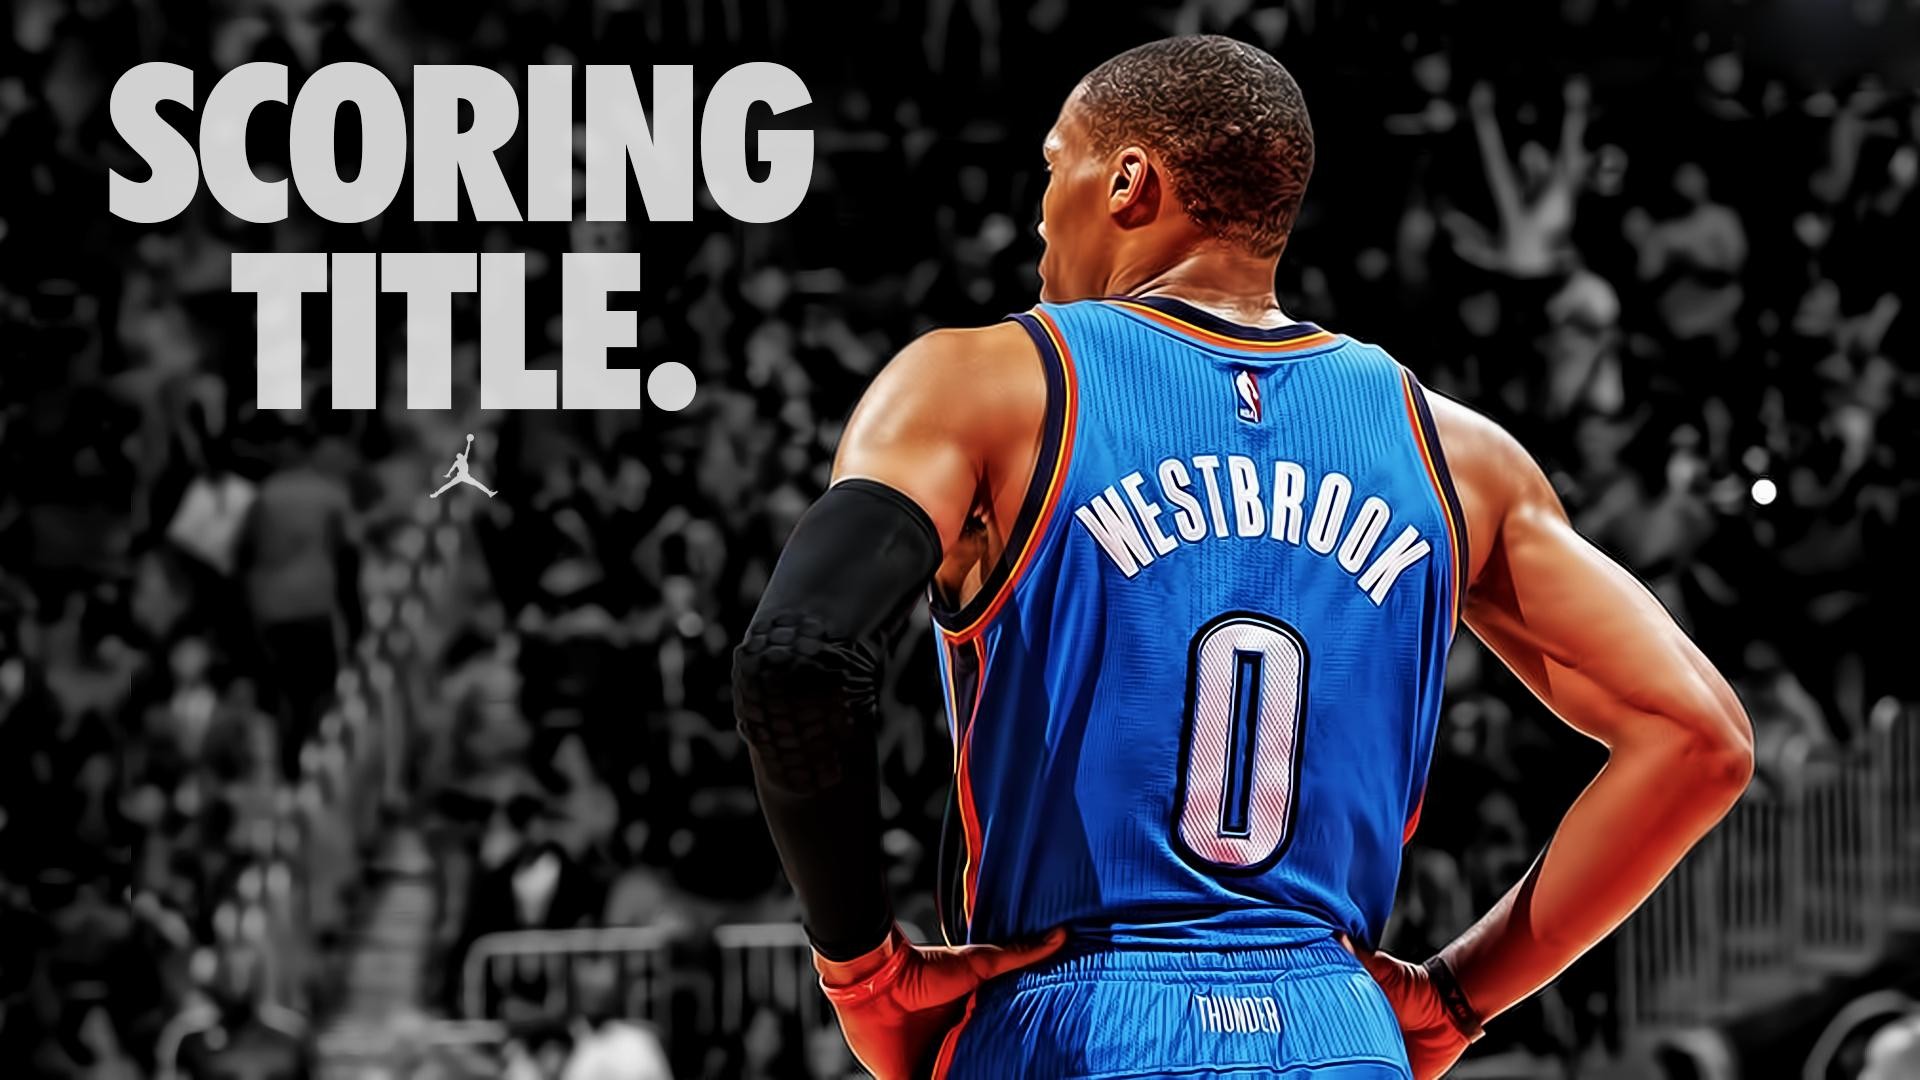 wallpaper.wiki-Russell-Westbrook-Backgrounds-Free-Download-PIC-